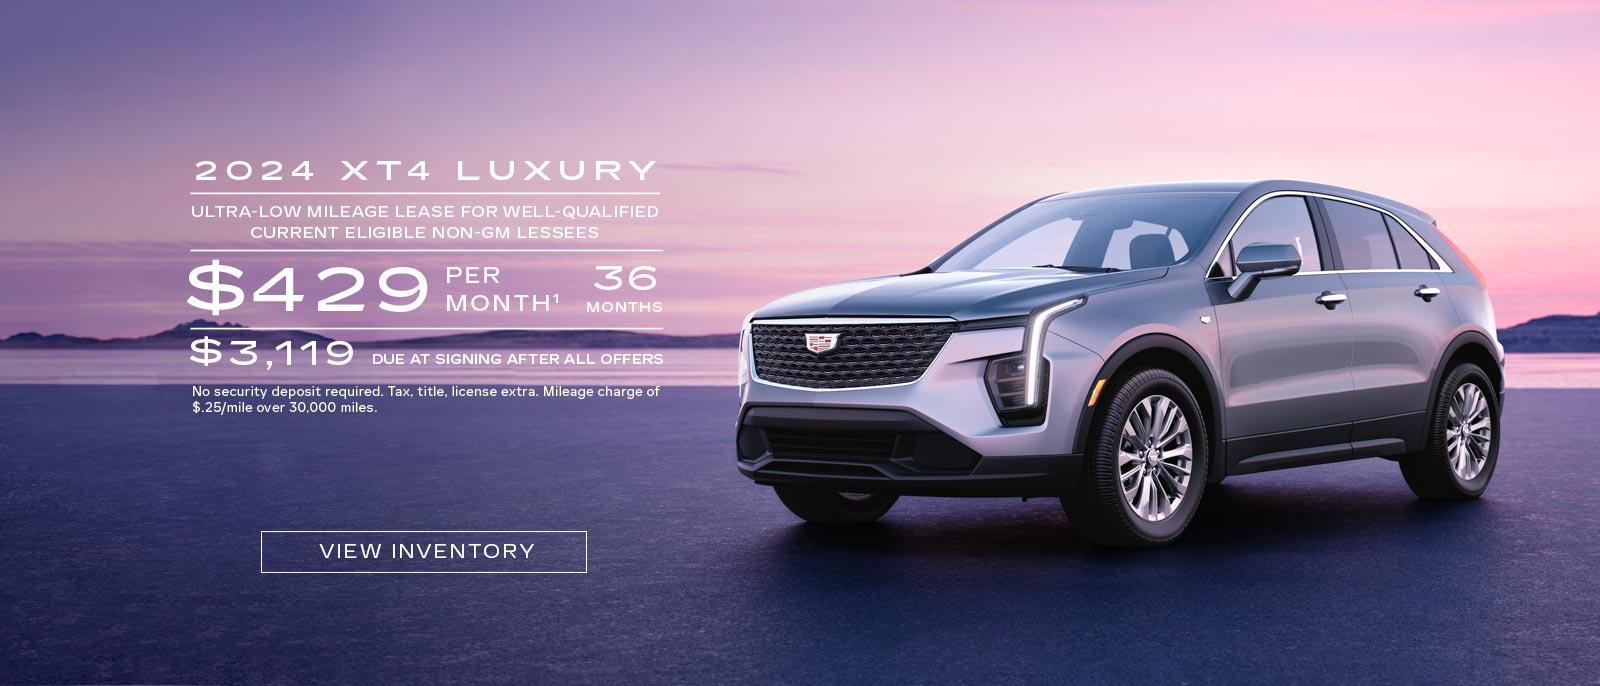 2024 XT4 Luxury. Ultra-low mileage lease for well-qualified current eligible Non-GM Lessees. $429 per month. 36 months. $3,119 due at signing after all offers.